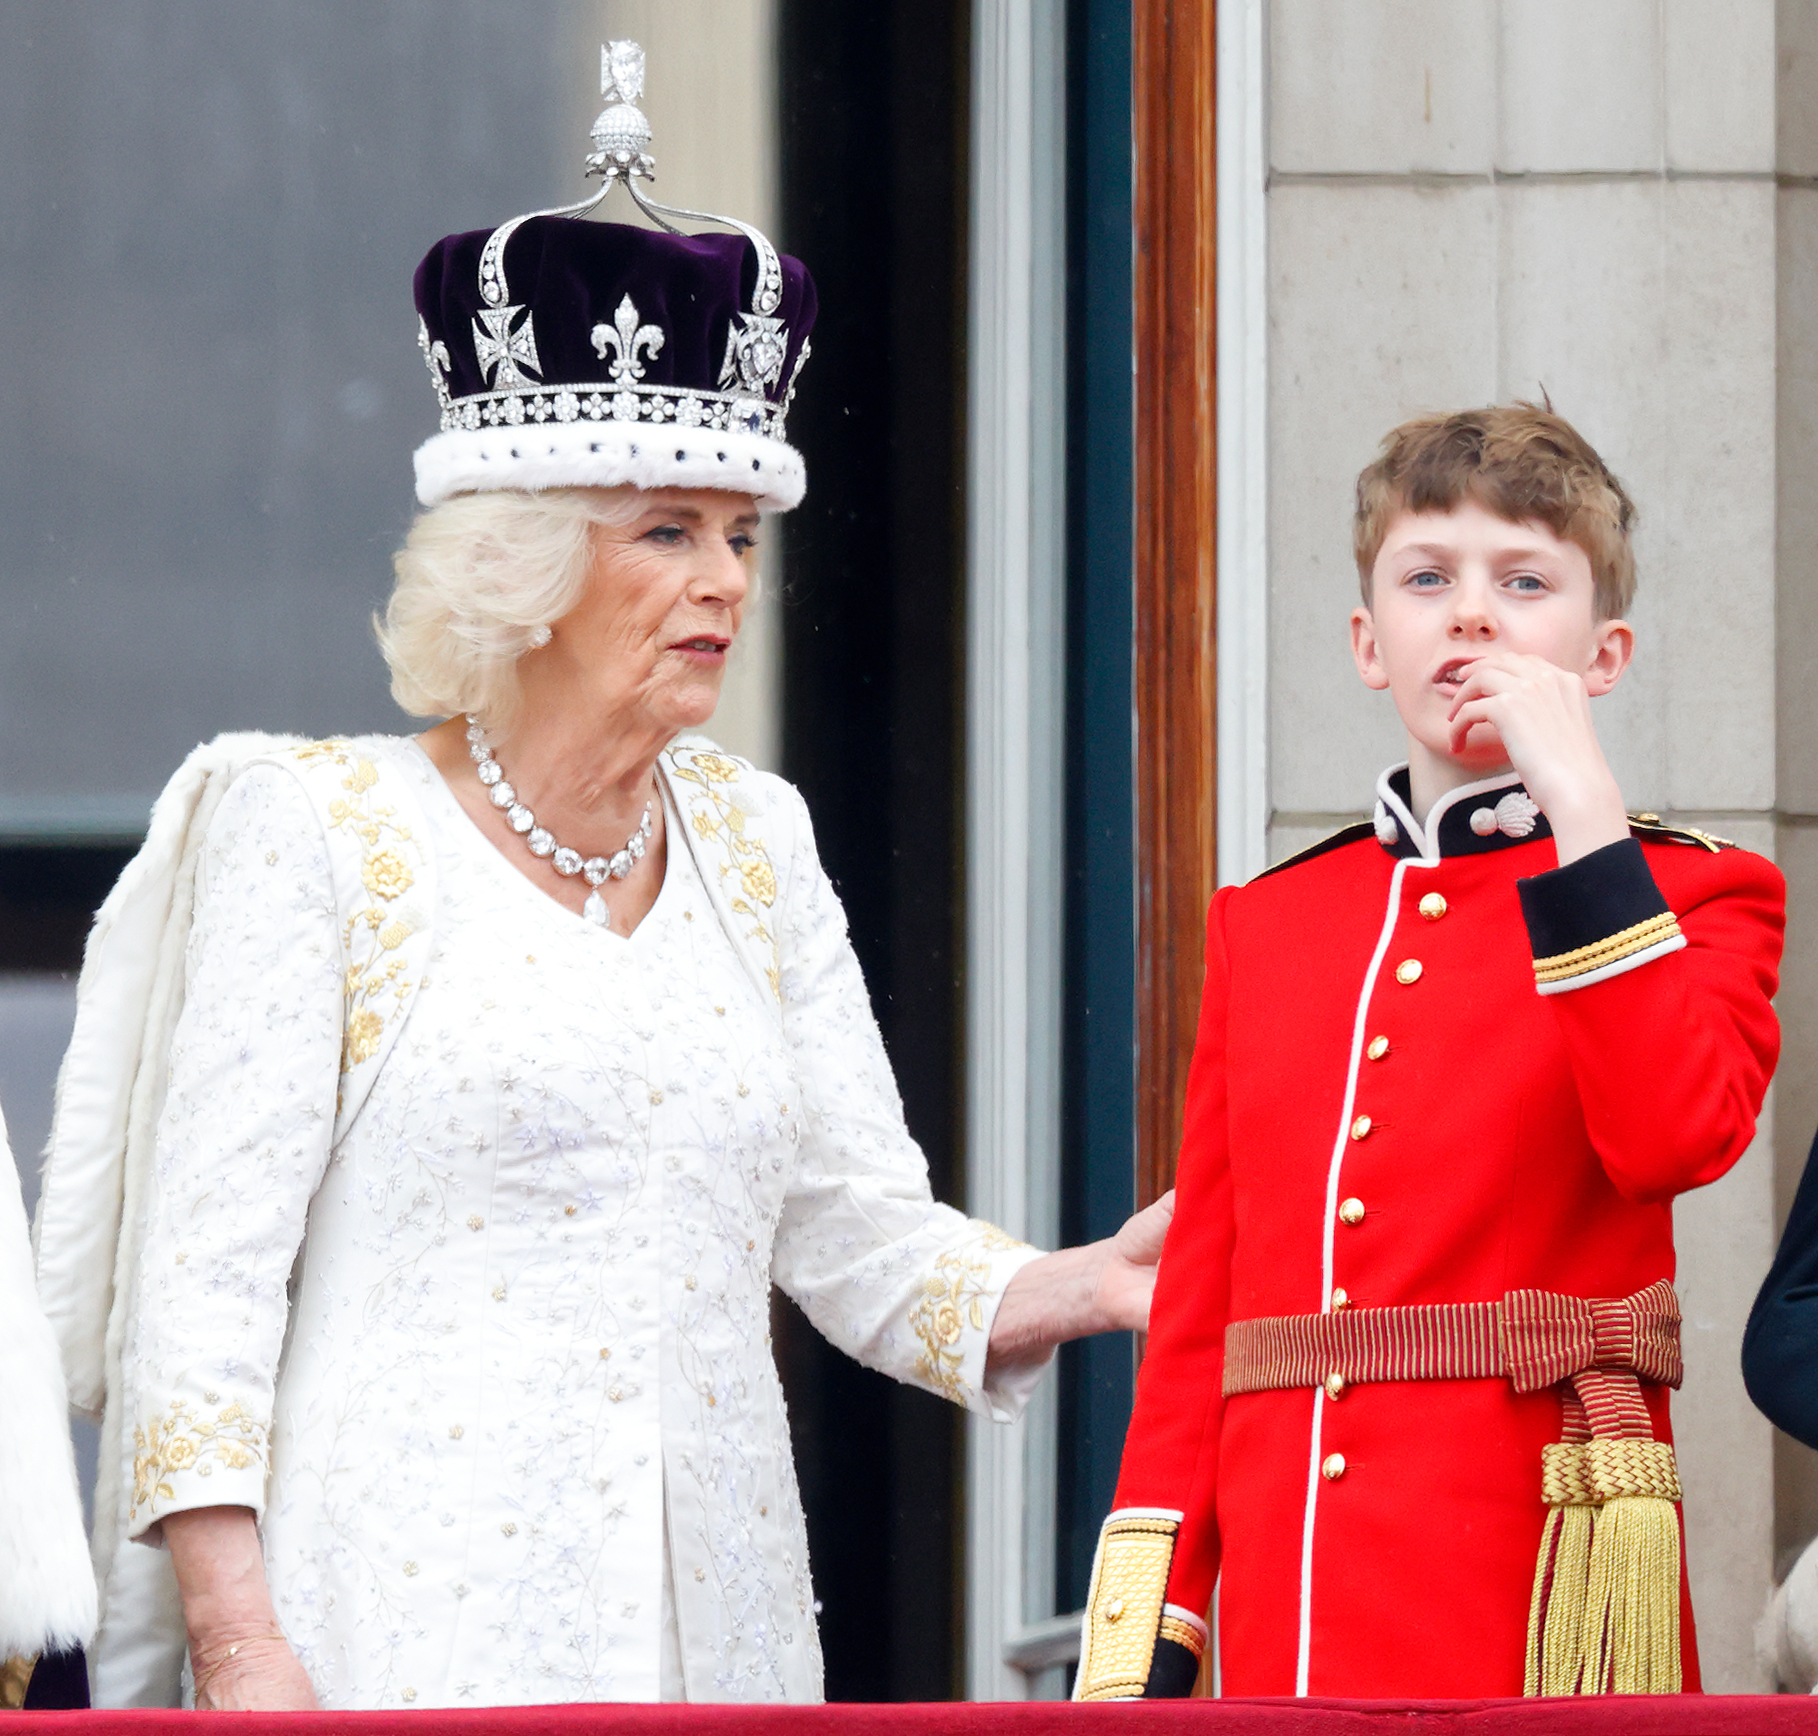 Queen Camilla talks to her grandson Freddy Parker Bowles at the Buckingham Palace, in London, following her coronation, on May 6, 2023. | Source: Getty Images